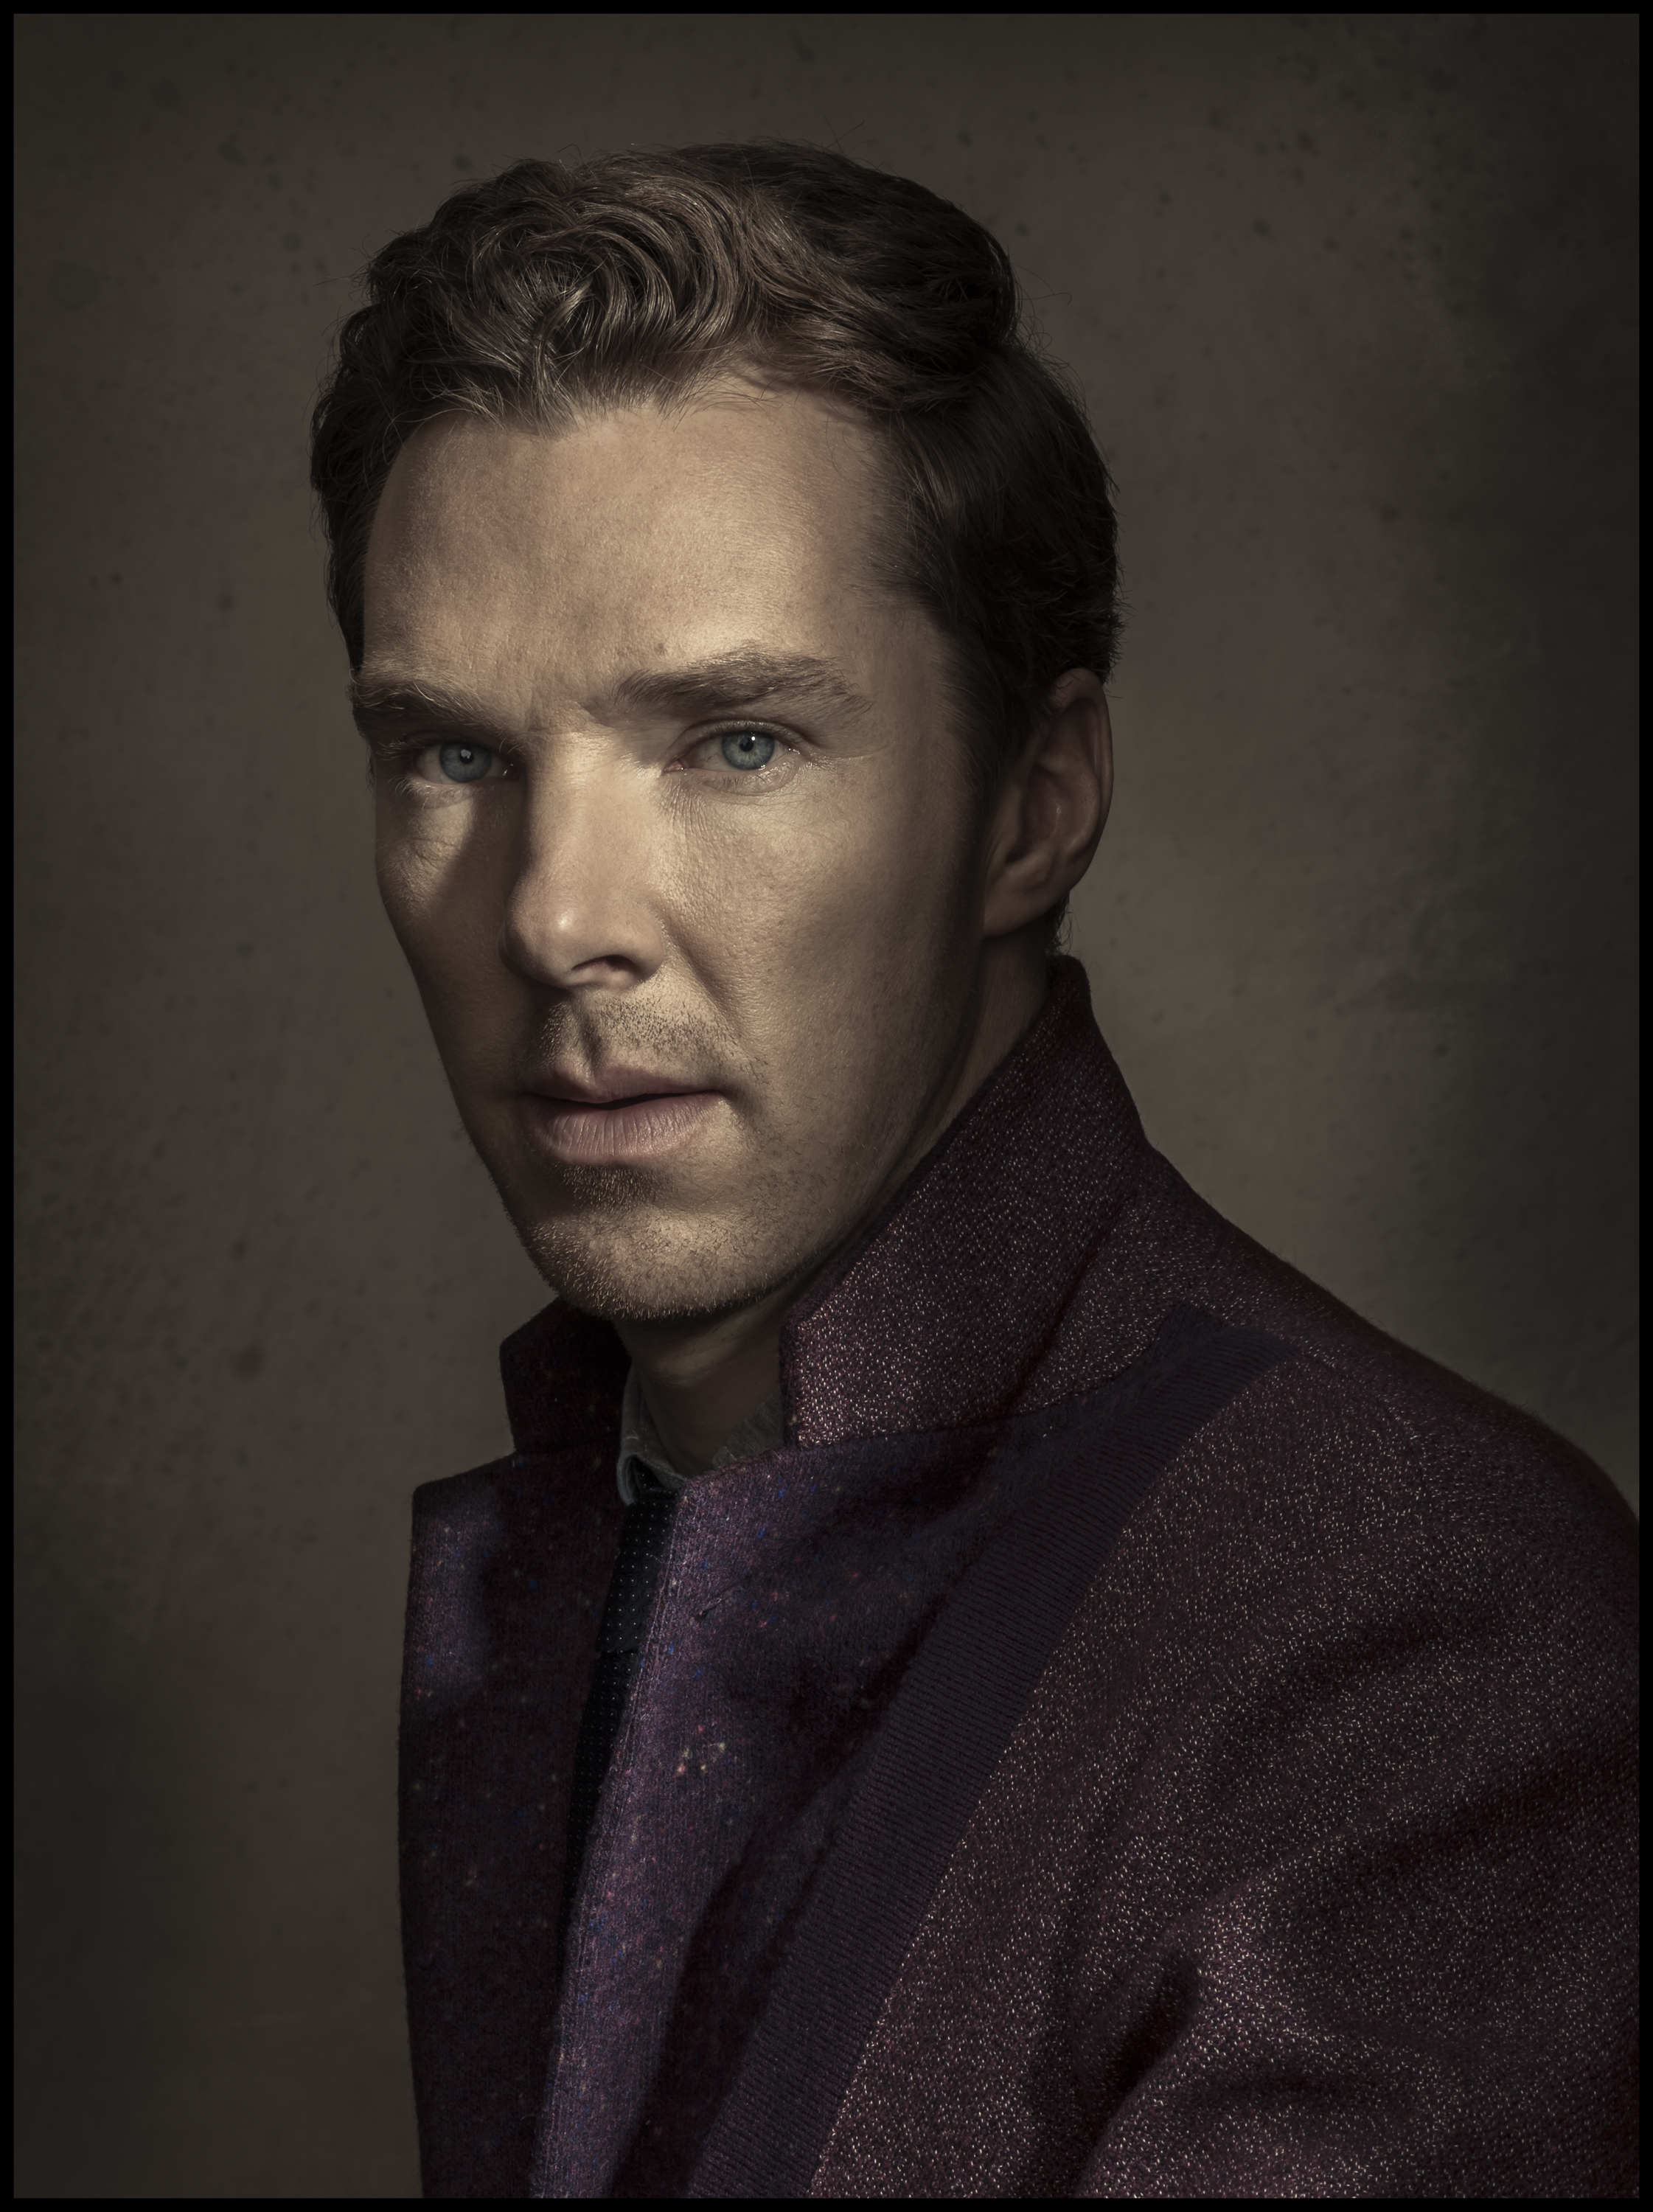 Benedict Cumberbatch, who portrays Turing in The Imitation Game